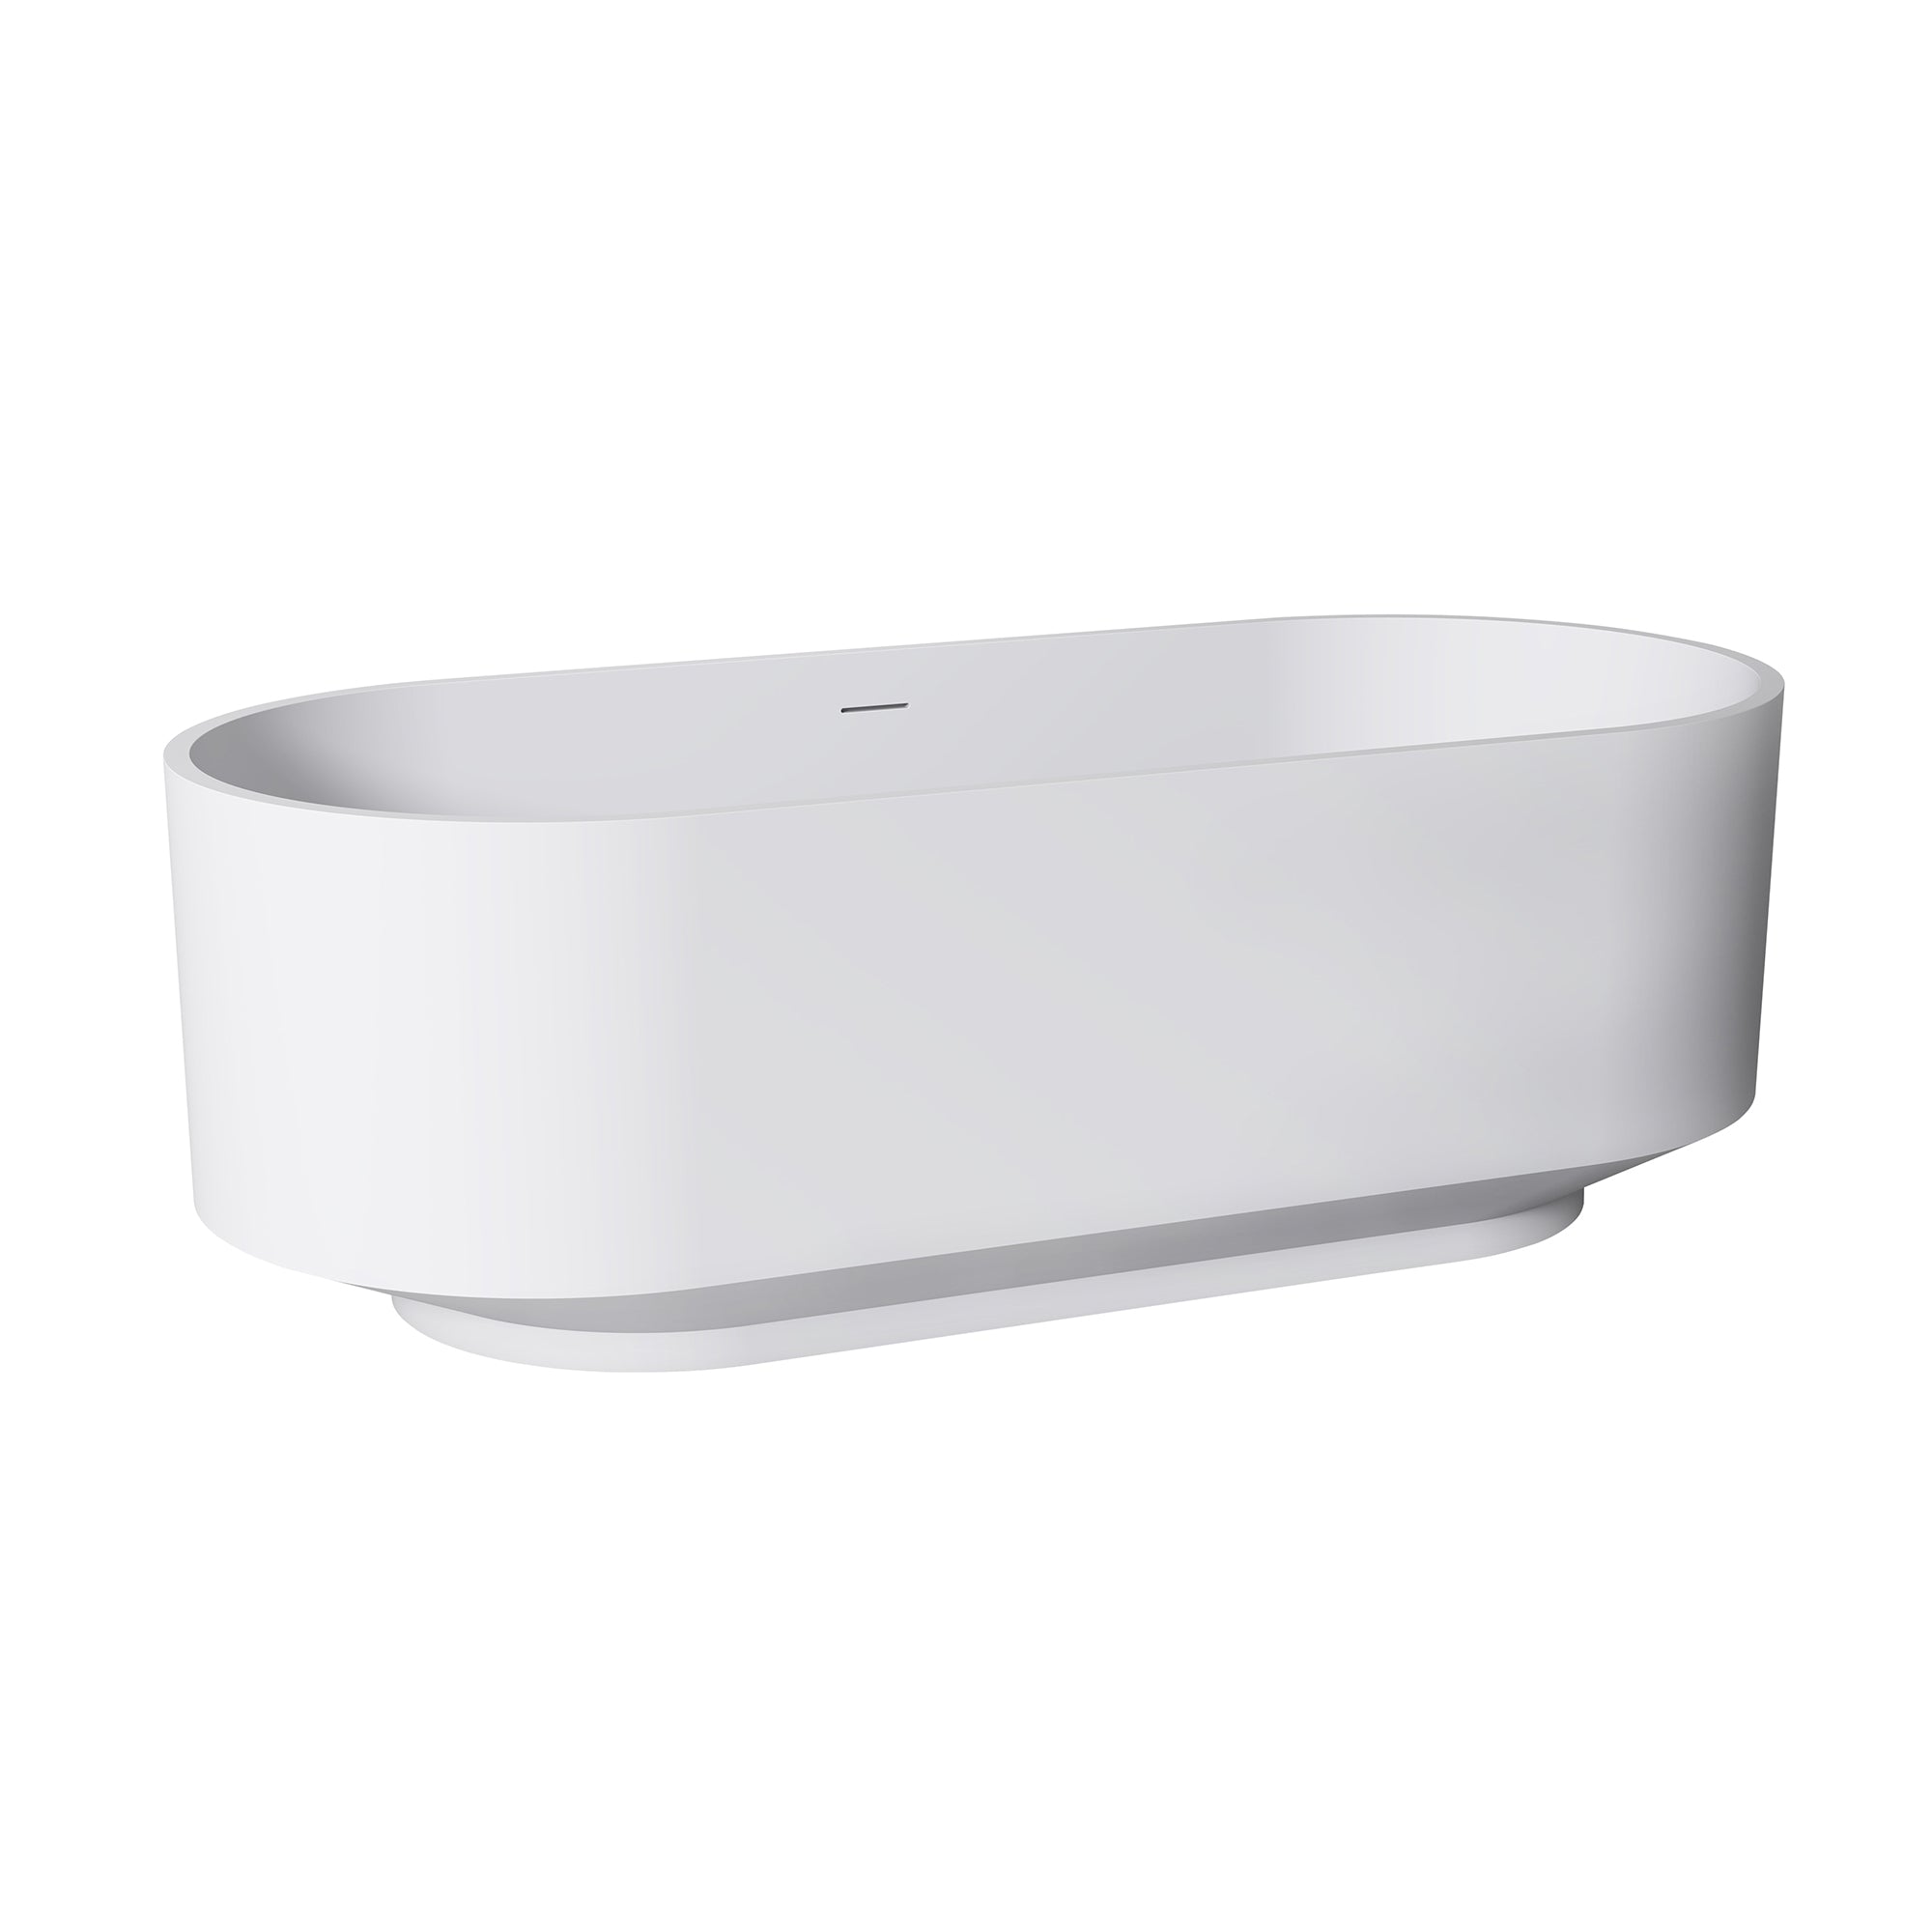 67" Oval Shaped Freestanding Solid Surface Soaking Bathtub with Overflow RX-S09-67